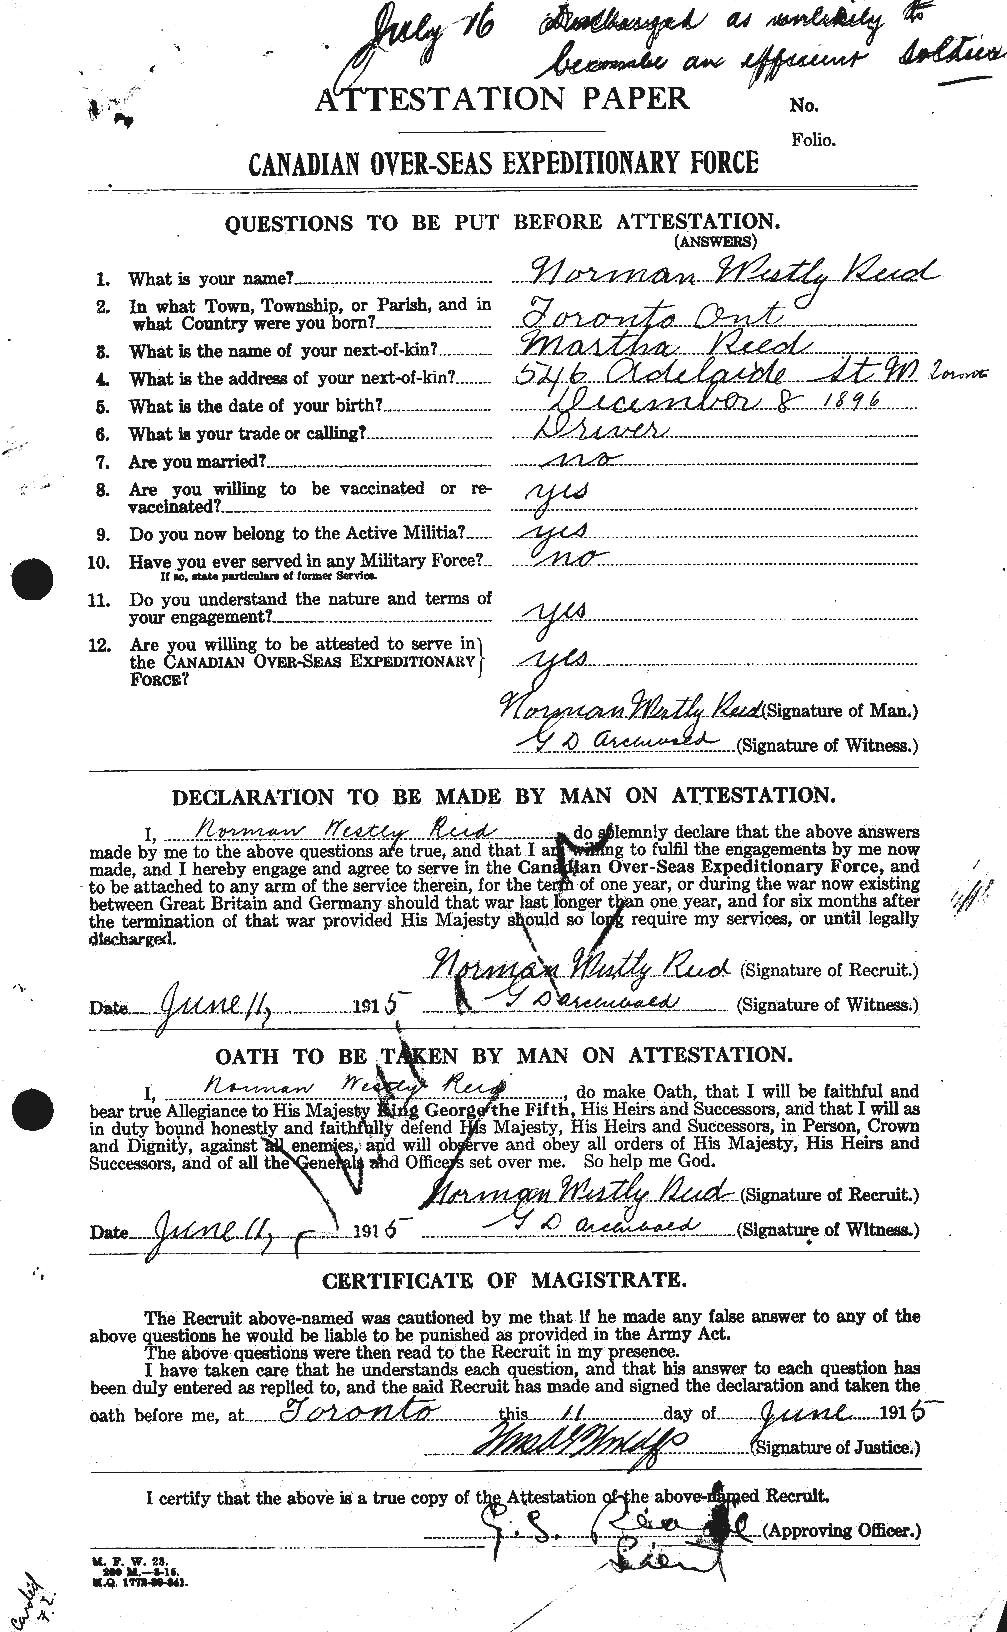 Personnel Records of the First World War - CEF 596474a